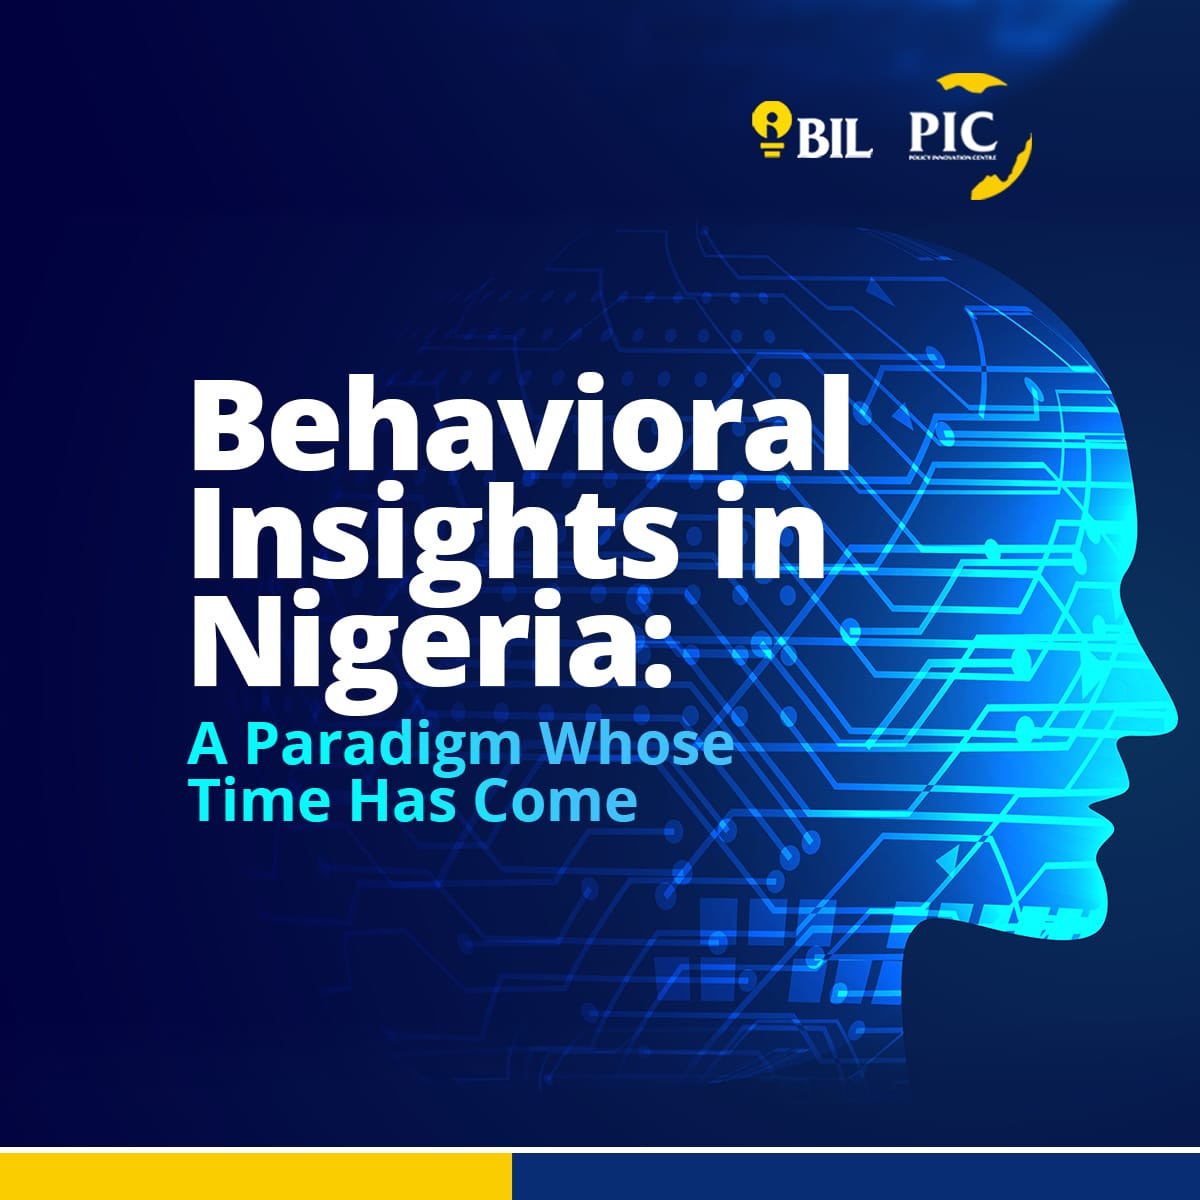 Behavioral Insights in Nigeria: A Paradigm Whose Time Has Come